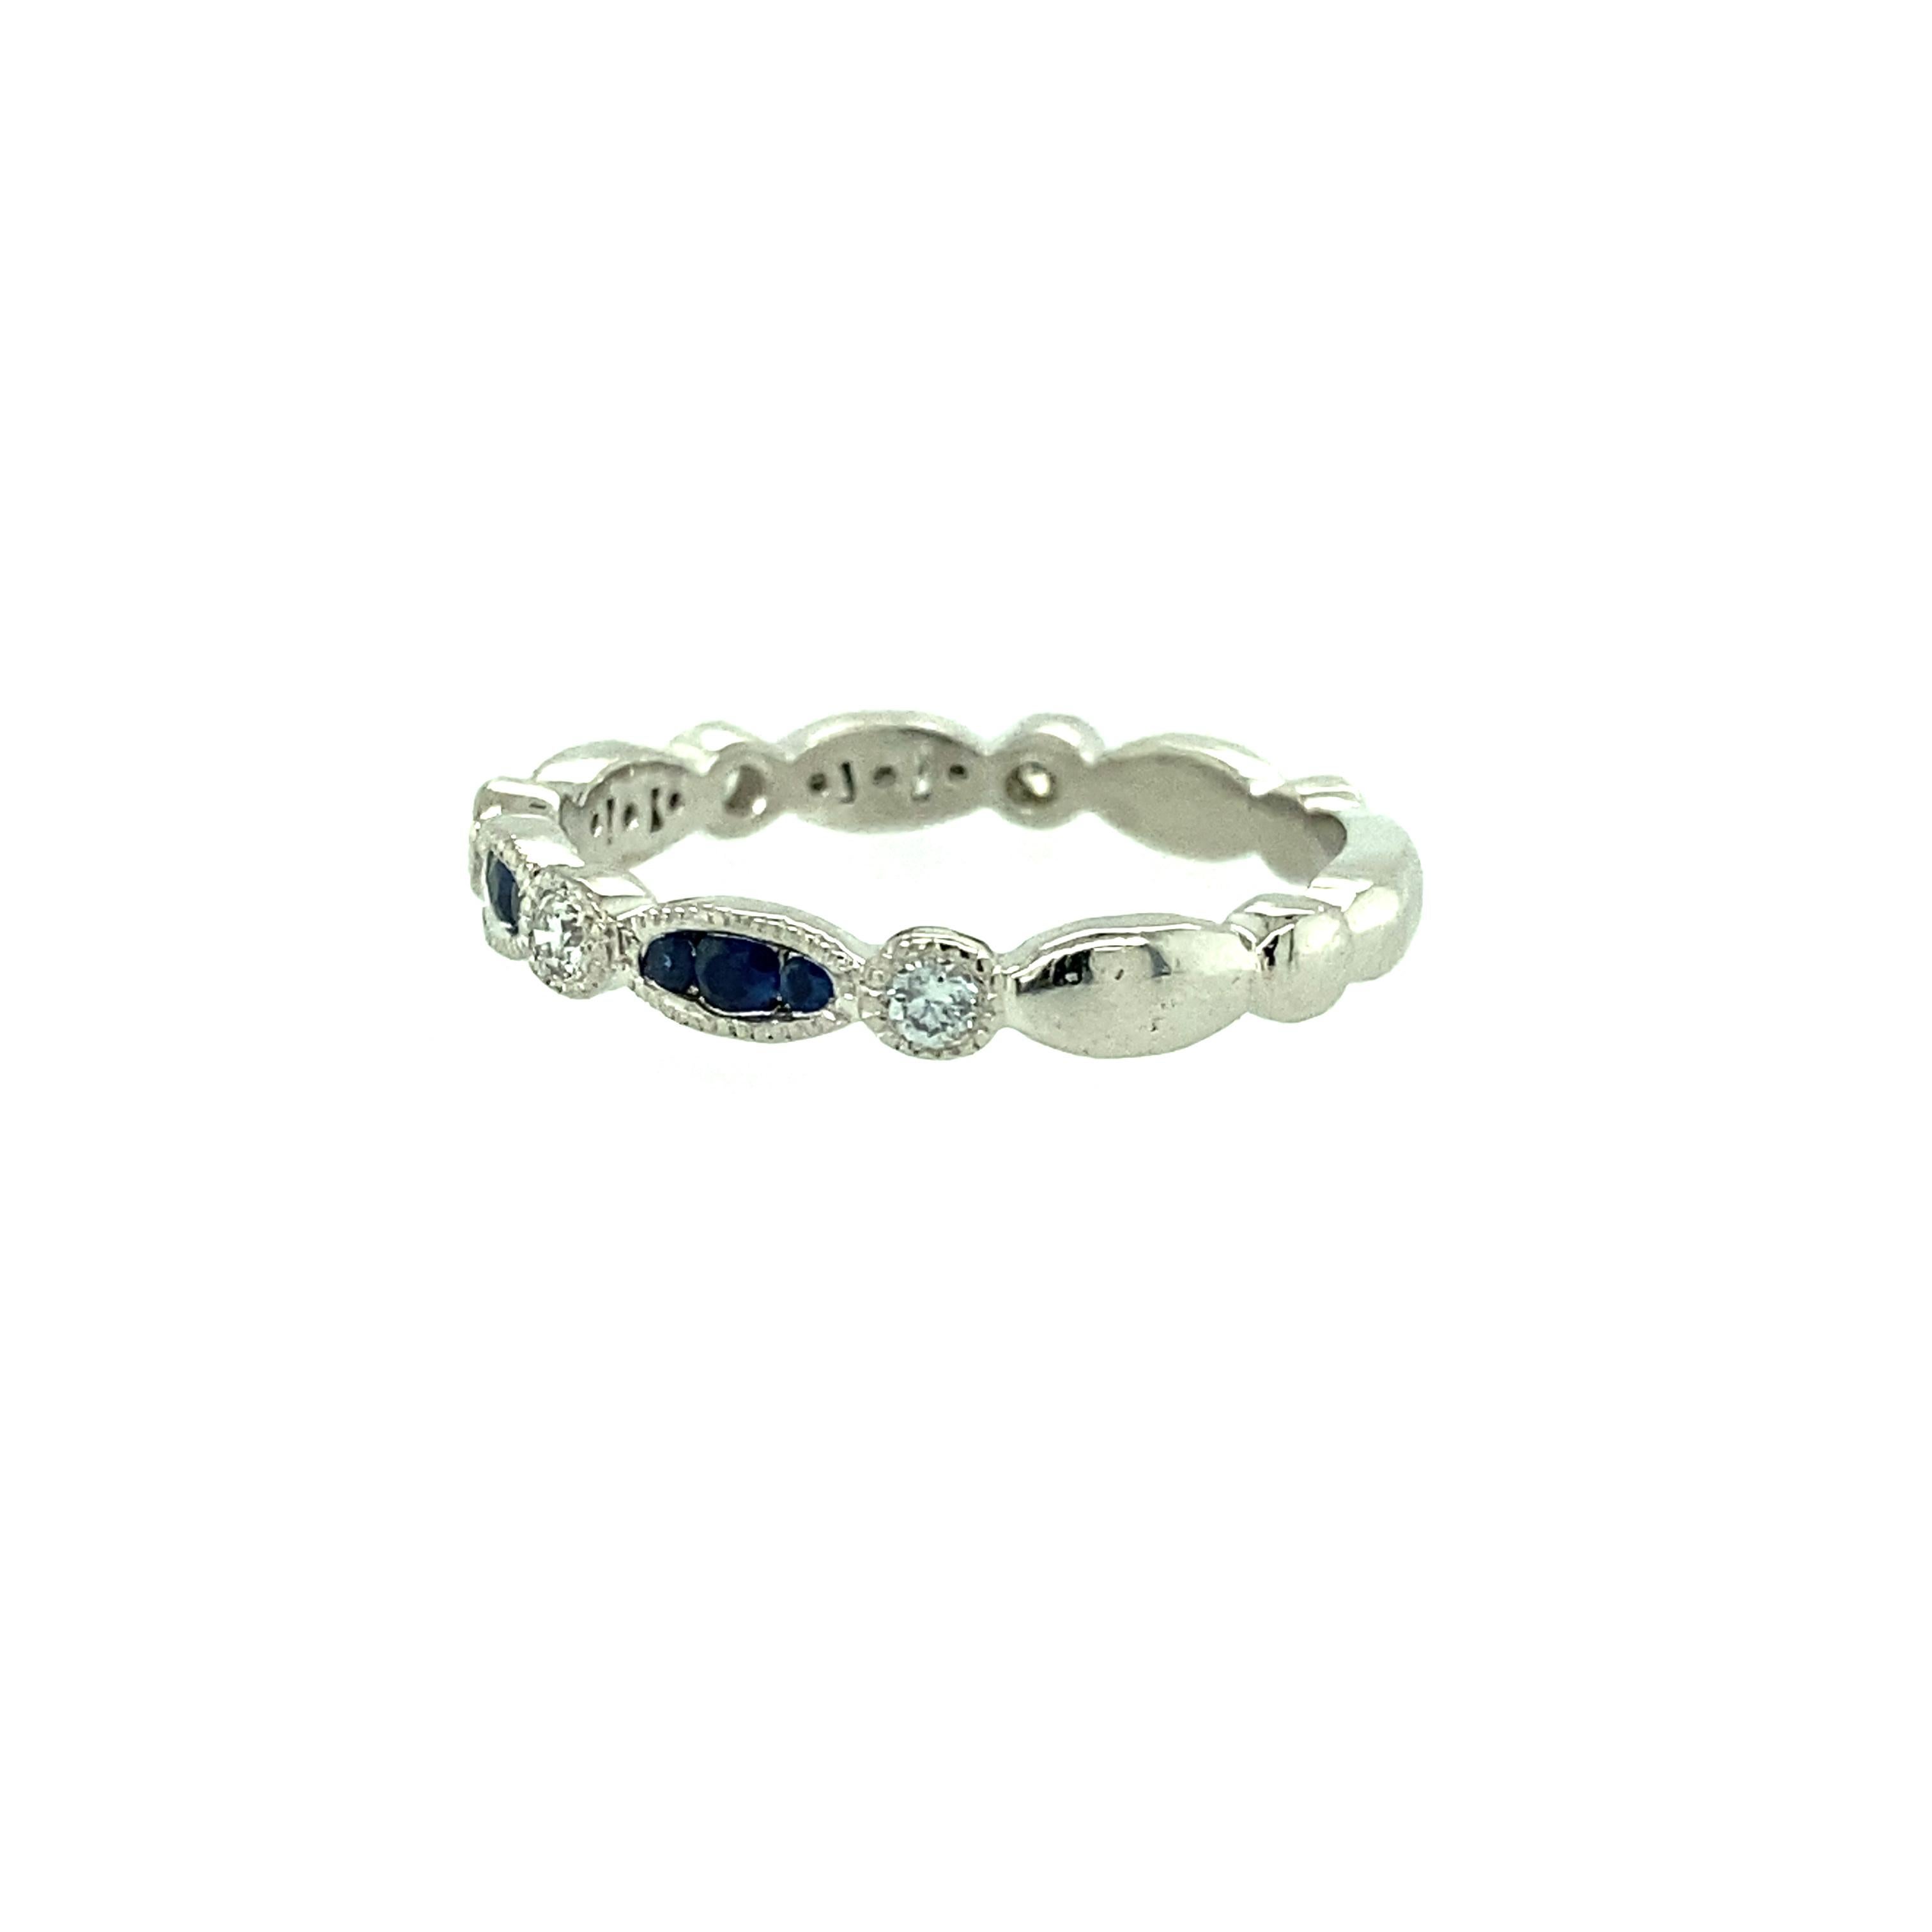 One platinum estate wedding band set with twelve natural blue sapphires, 0.25 carat total weight and five brilliant cut diamonds, 0.15 carat total weight with matching H/I color and SI clarity.  The ring measures 2.75mm wide and weighs 3.48 grams